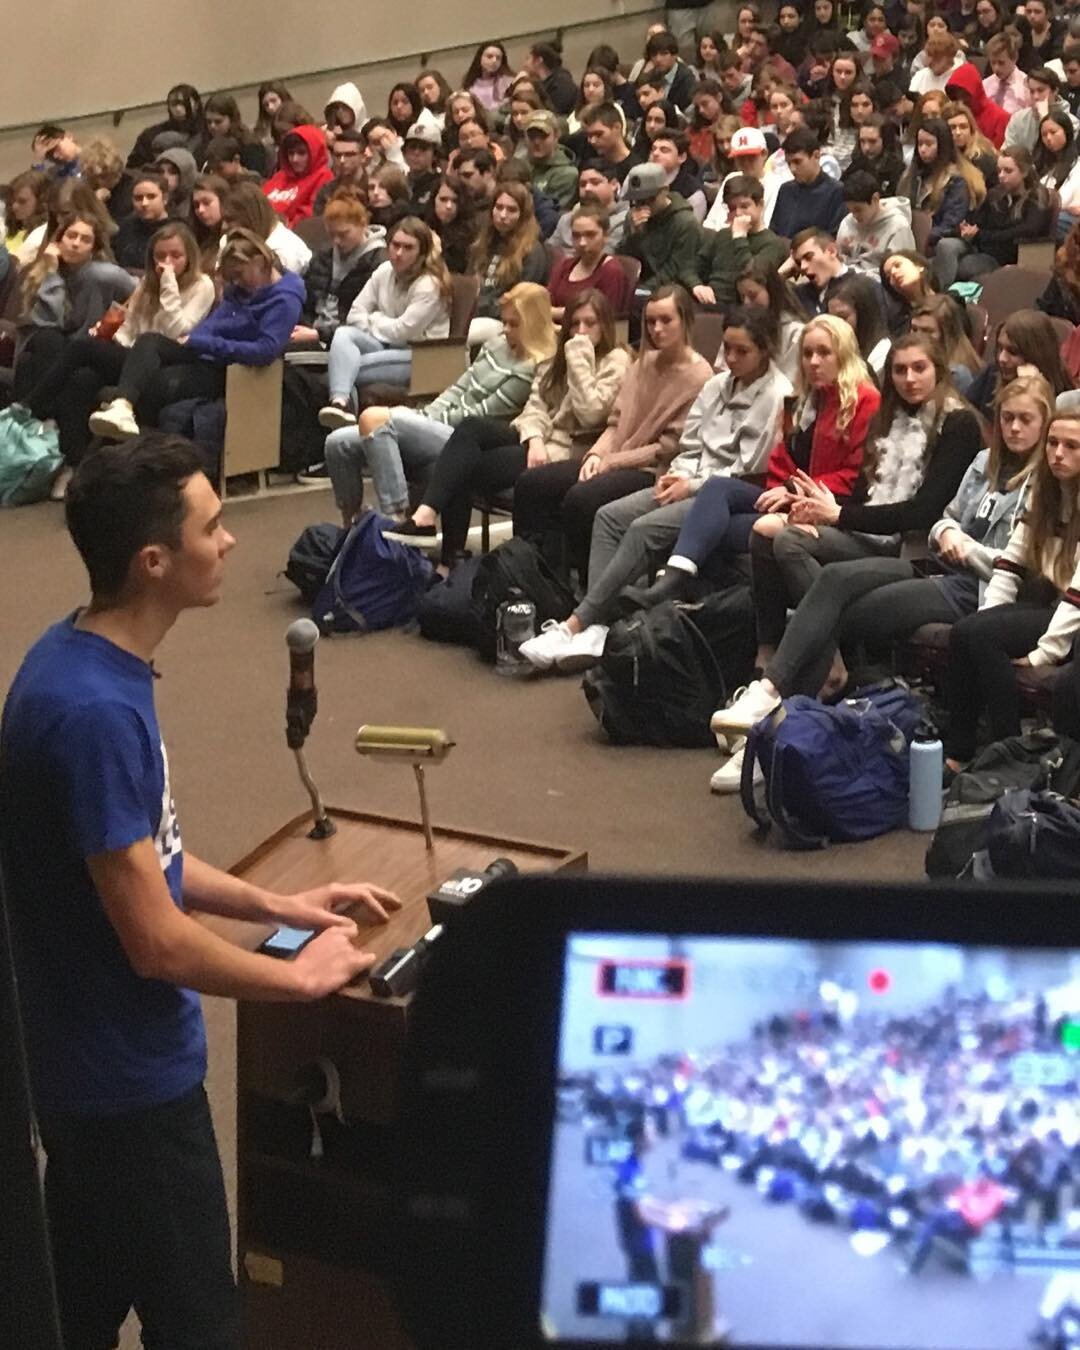 HCAT was at the inspirational talk by Parkland survivor David Hogg. Look for the edited recording next week.